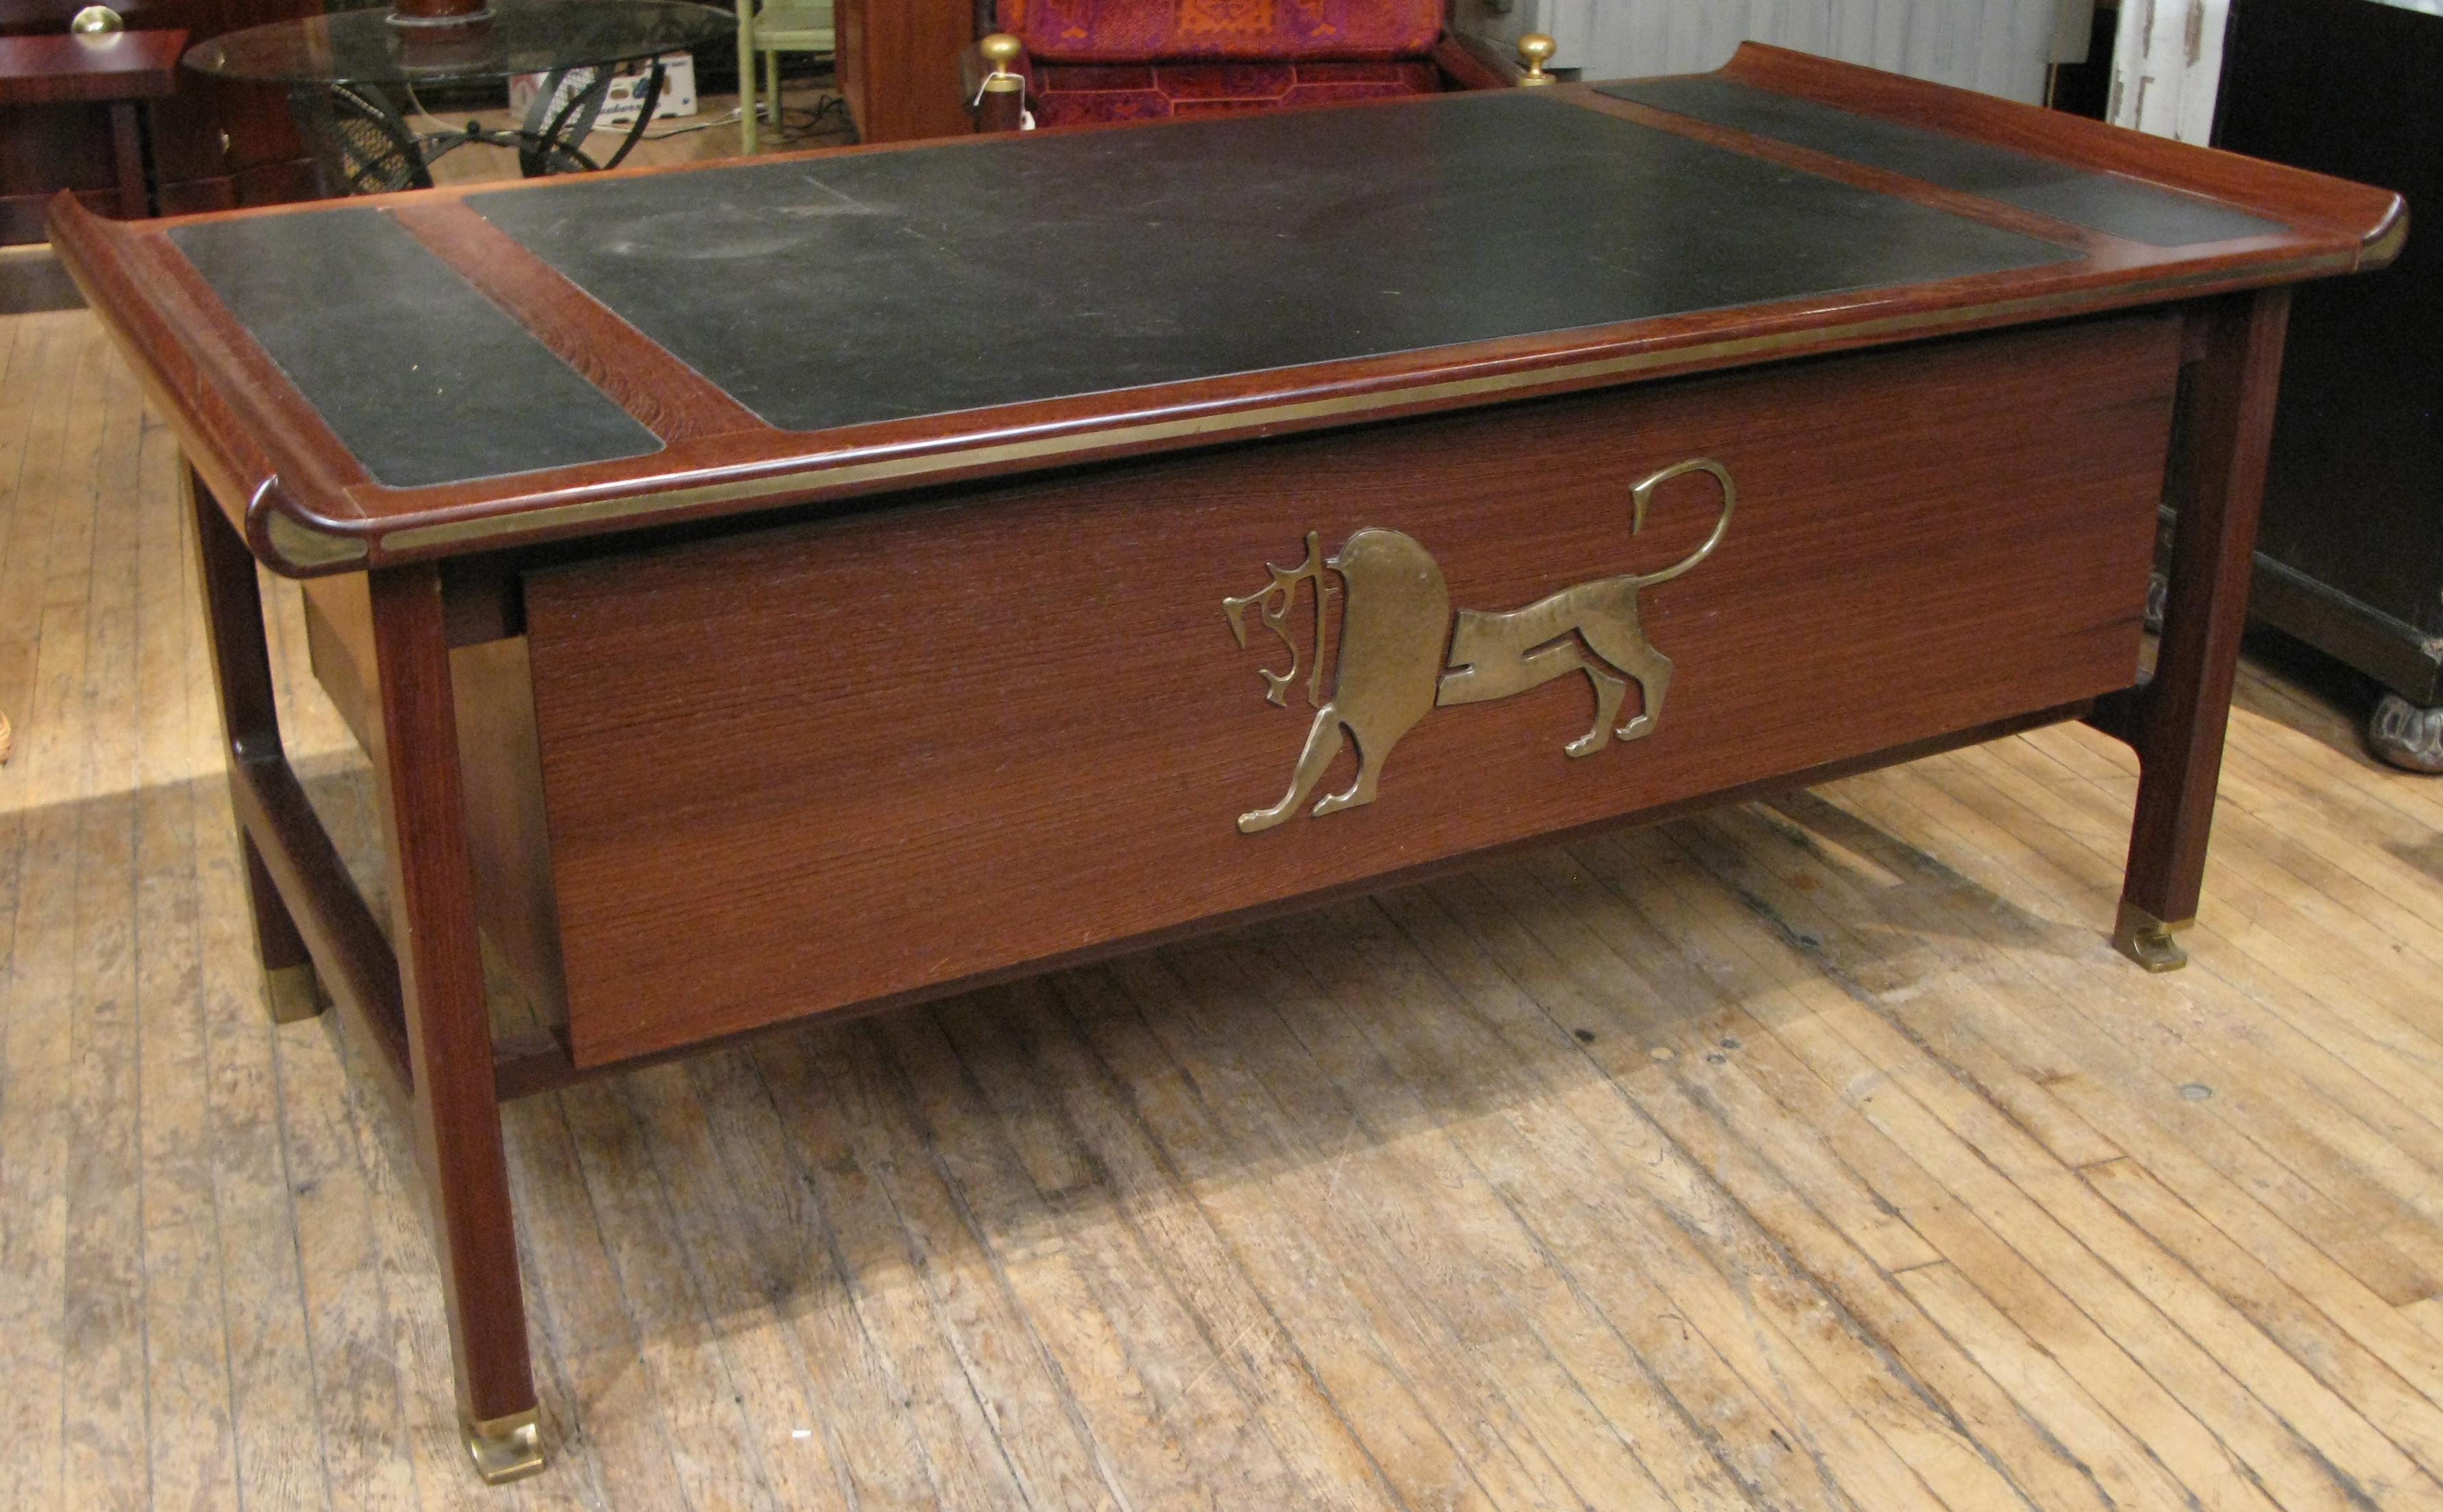 a rare and impressive executive desk designed by Ib Kofod Larsen from his Megiddo Collection inspired by his travels in the mid-East, the desk is made in solid Wenge with inset brass details, solid brass feet and hardware. on the front of the desk